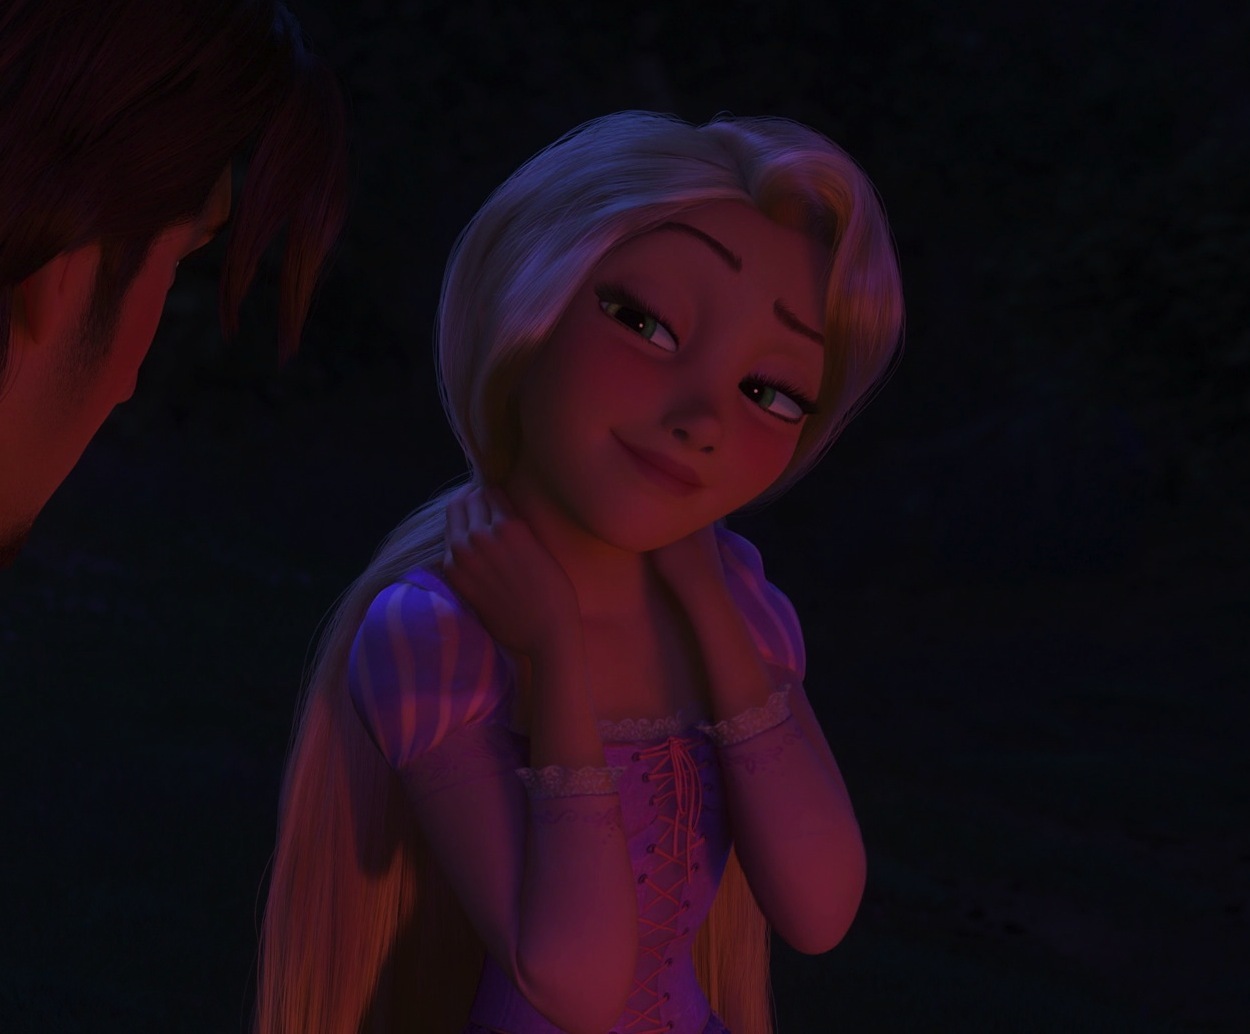 Do you think that Rapunzel is a well-developed character 